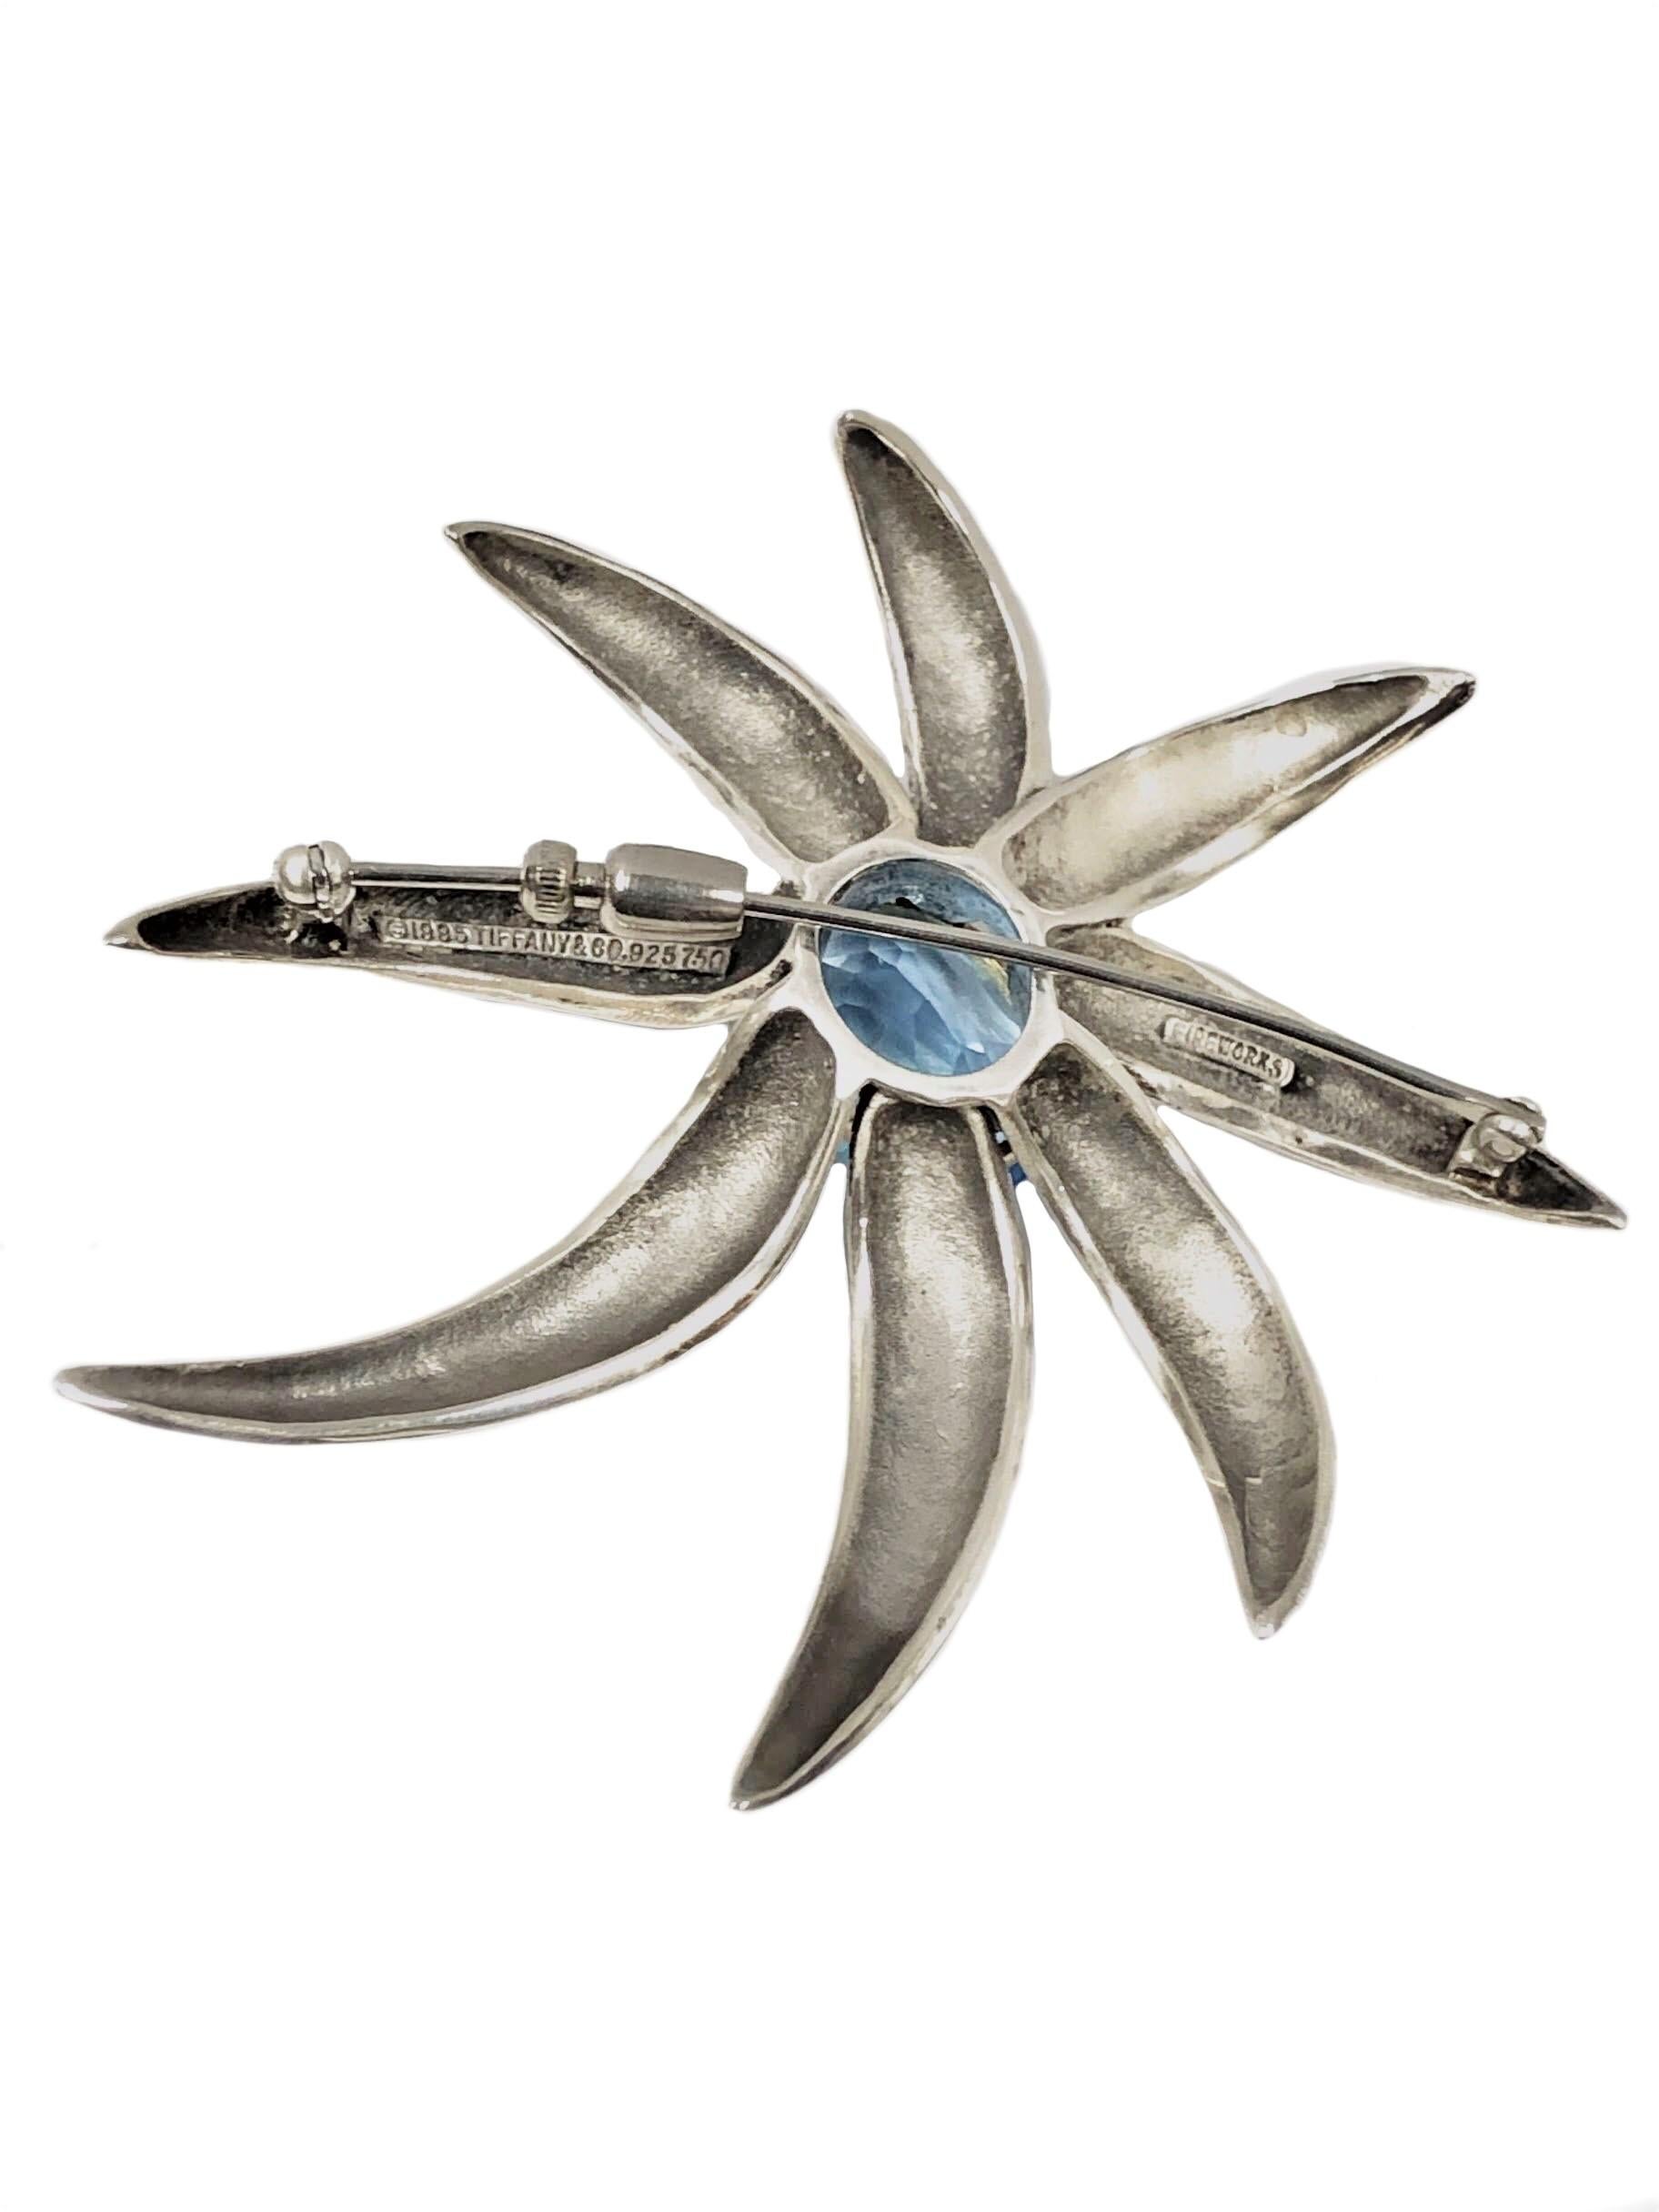 Circa 1990s Tiffany & Company Fireworks collection Brooch, Sterling Silver and 18K Yellow Gold and set with an Oval Royal Blue Topaz of approximately 6 Carats. The Brooch measures 2 3/4 X 2 1/2 inches. Comes in the original Tiffany & Company